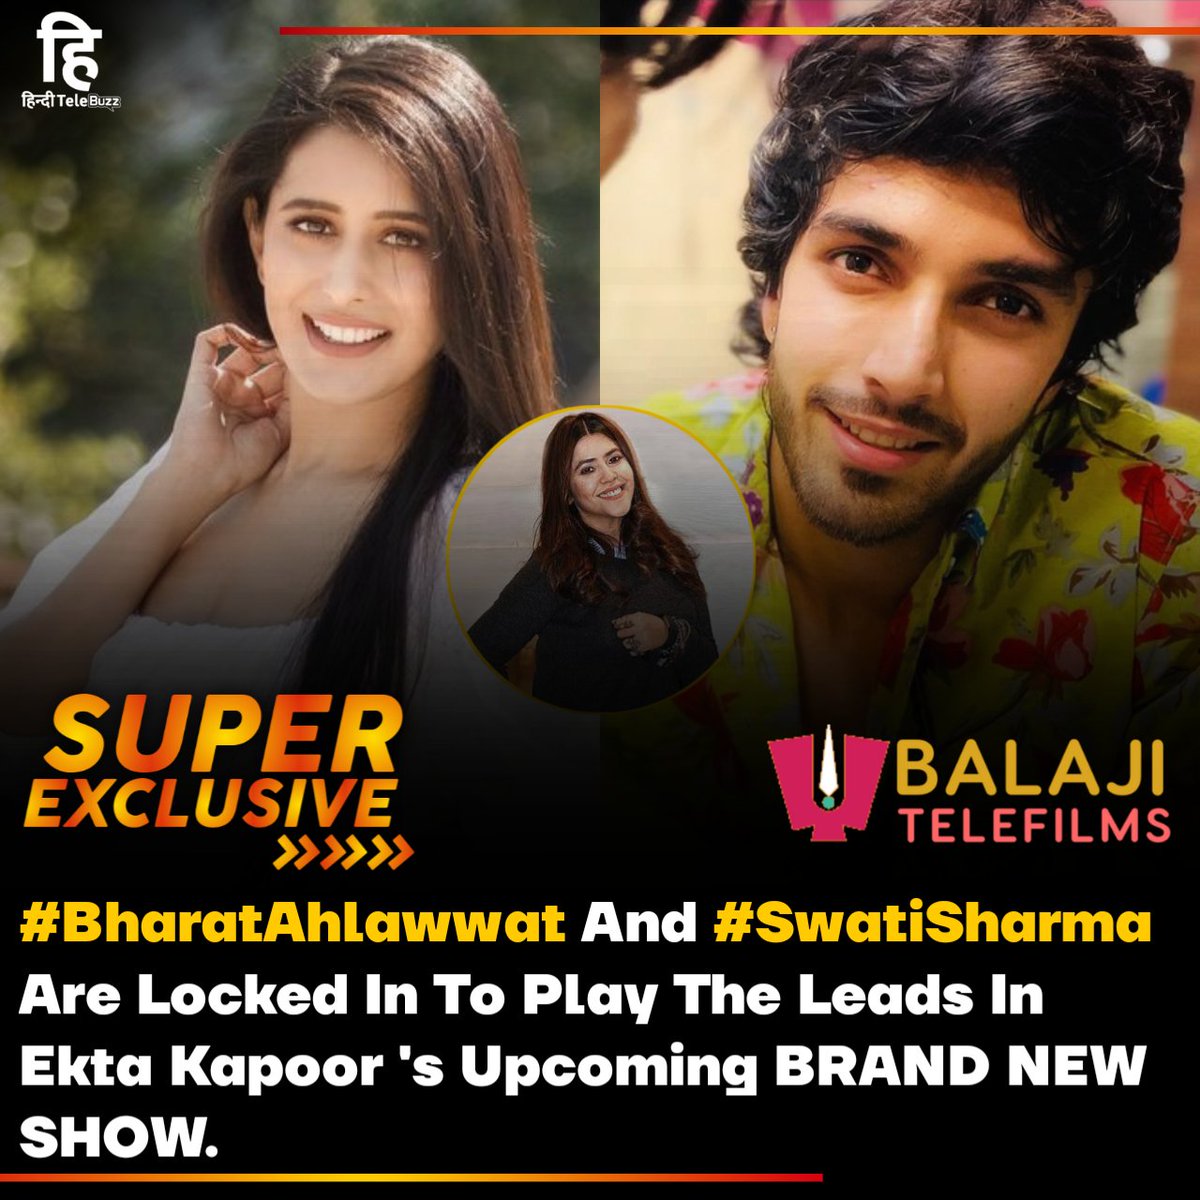 #SuperExclusive

#BharatAhlawwat And #SwatiSharma Are Locked In To Play The Leads In Ekta Kapoor 's Upcoming BRAND NEW SHOW Next On #ColorsTv . It will Replace #Udaariyaan Next Year.

@hinditelebuzz EXCLUSIVE